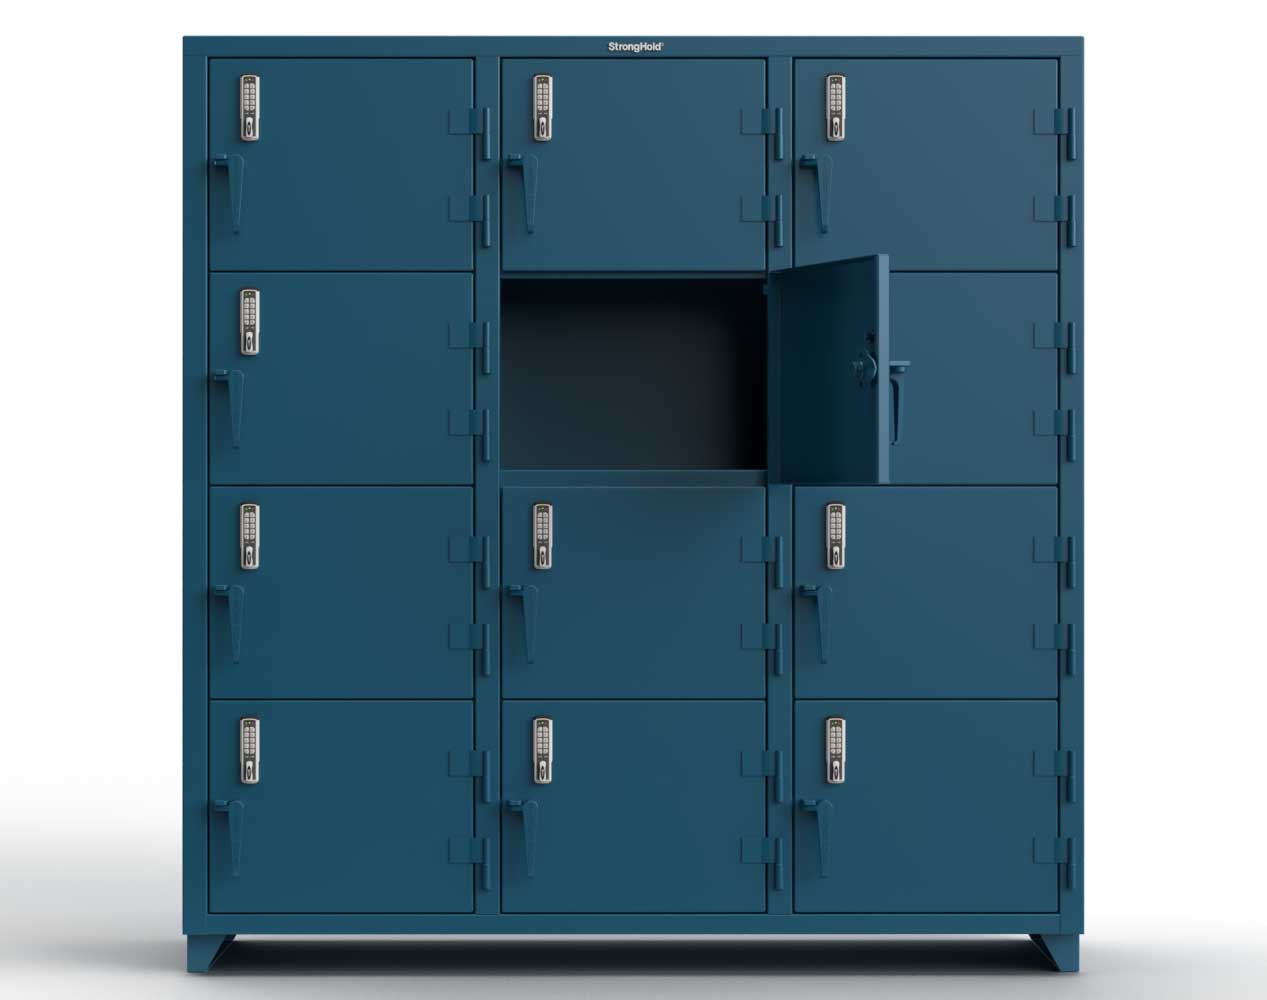 Extra Heavy Duty 14 GA 4-Tier Locker with Keyless Entry Lock, 12 Compartments – 72 in. W x 24 in. D x 75 in. H